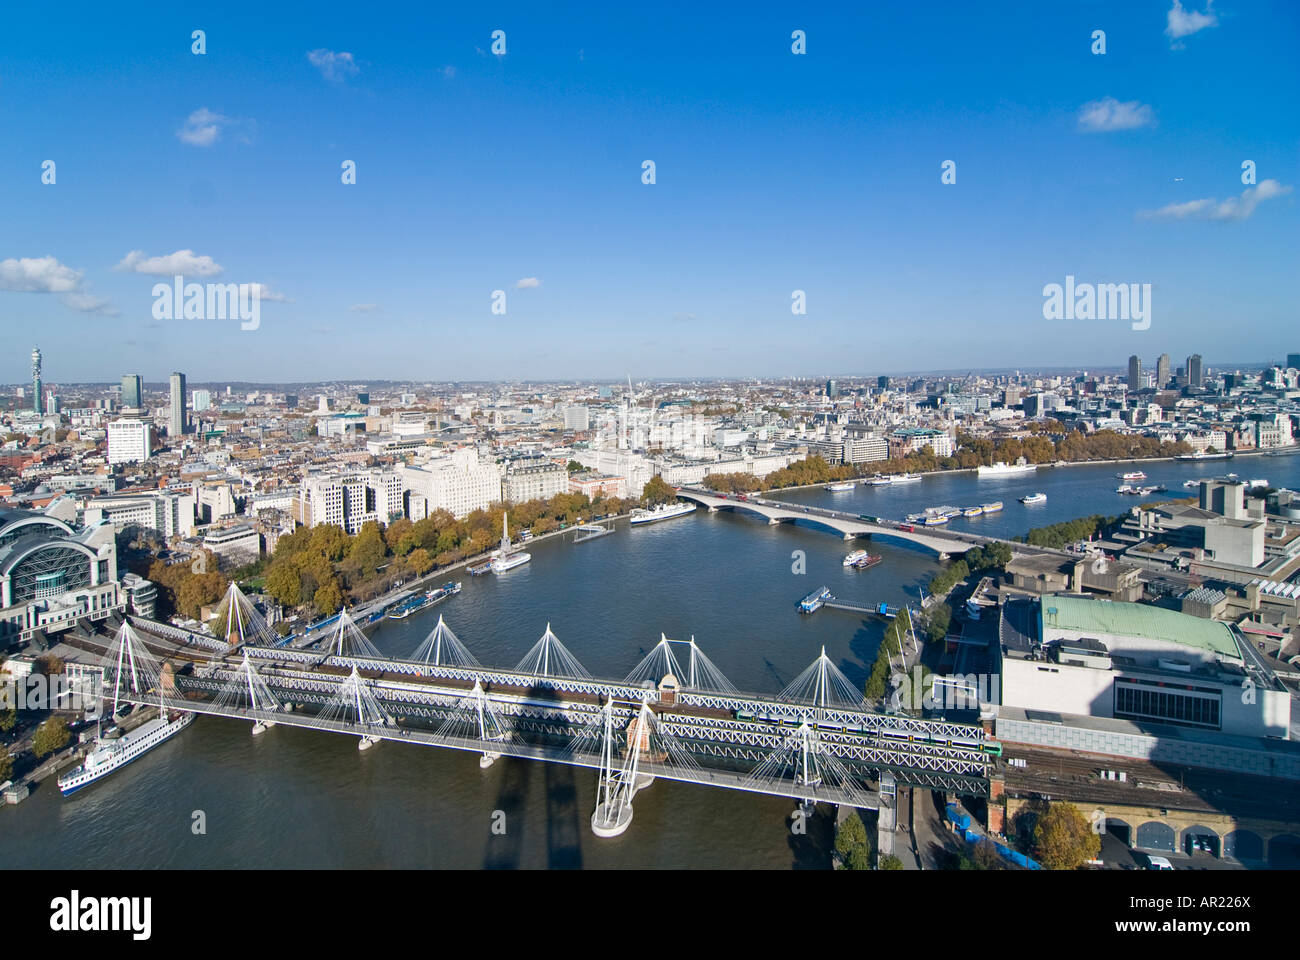 Horizontal wide angle aerial view across the rooftops of central and eastern London on a bright sunny day Stock Photo